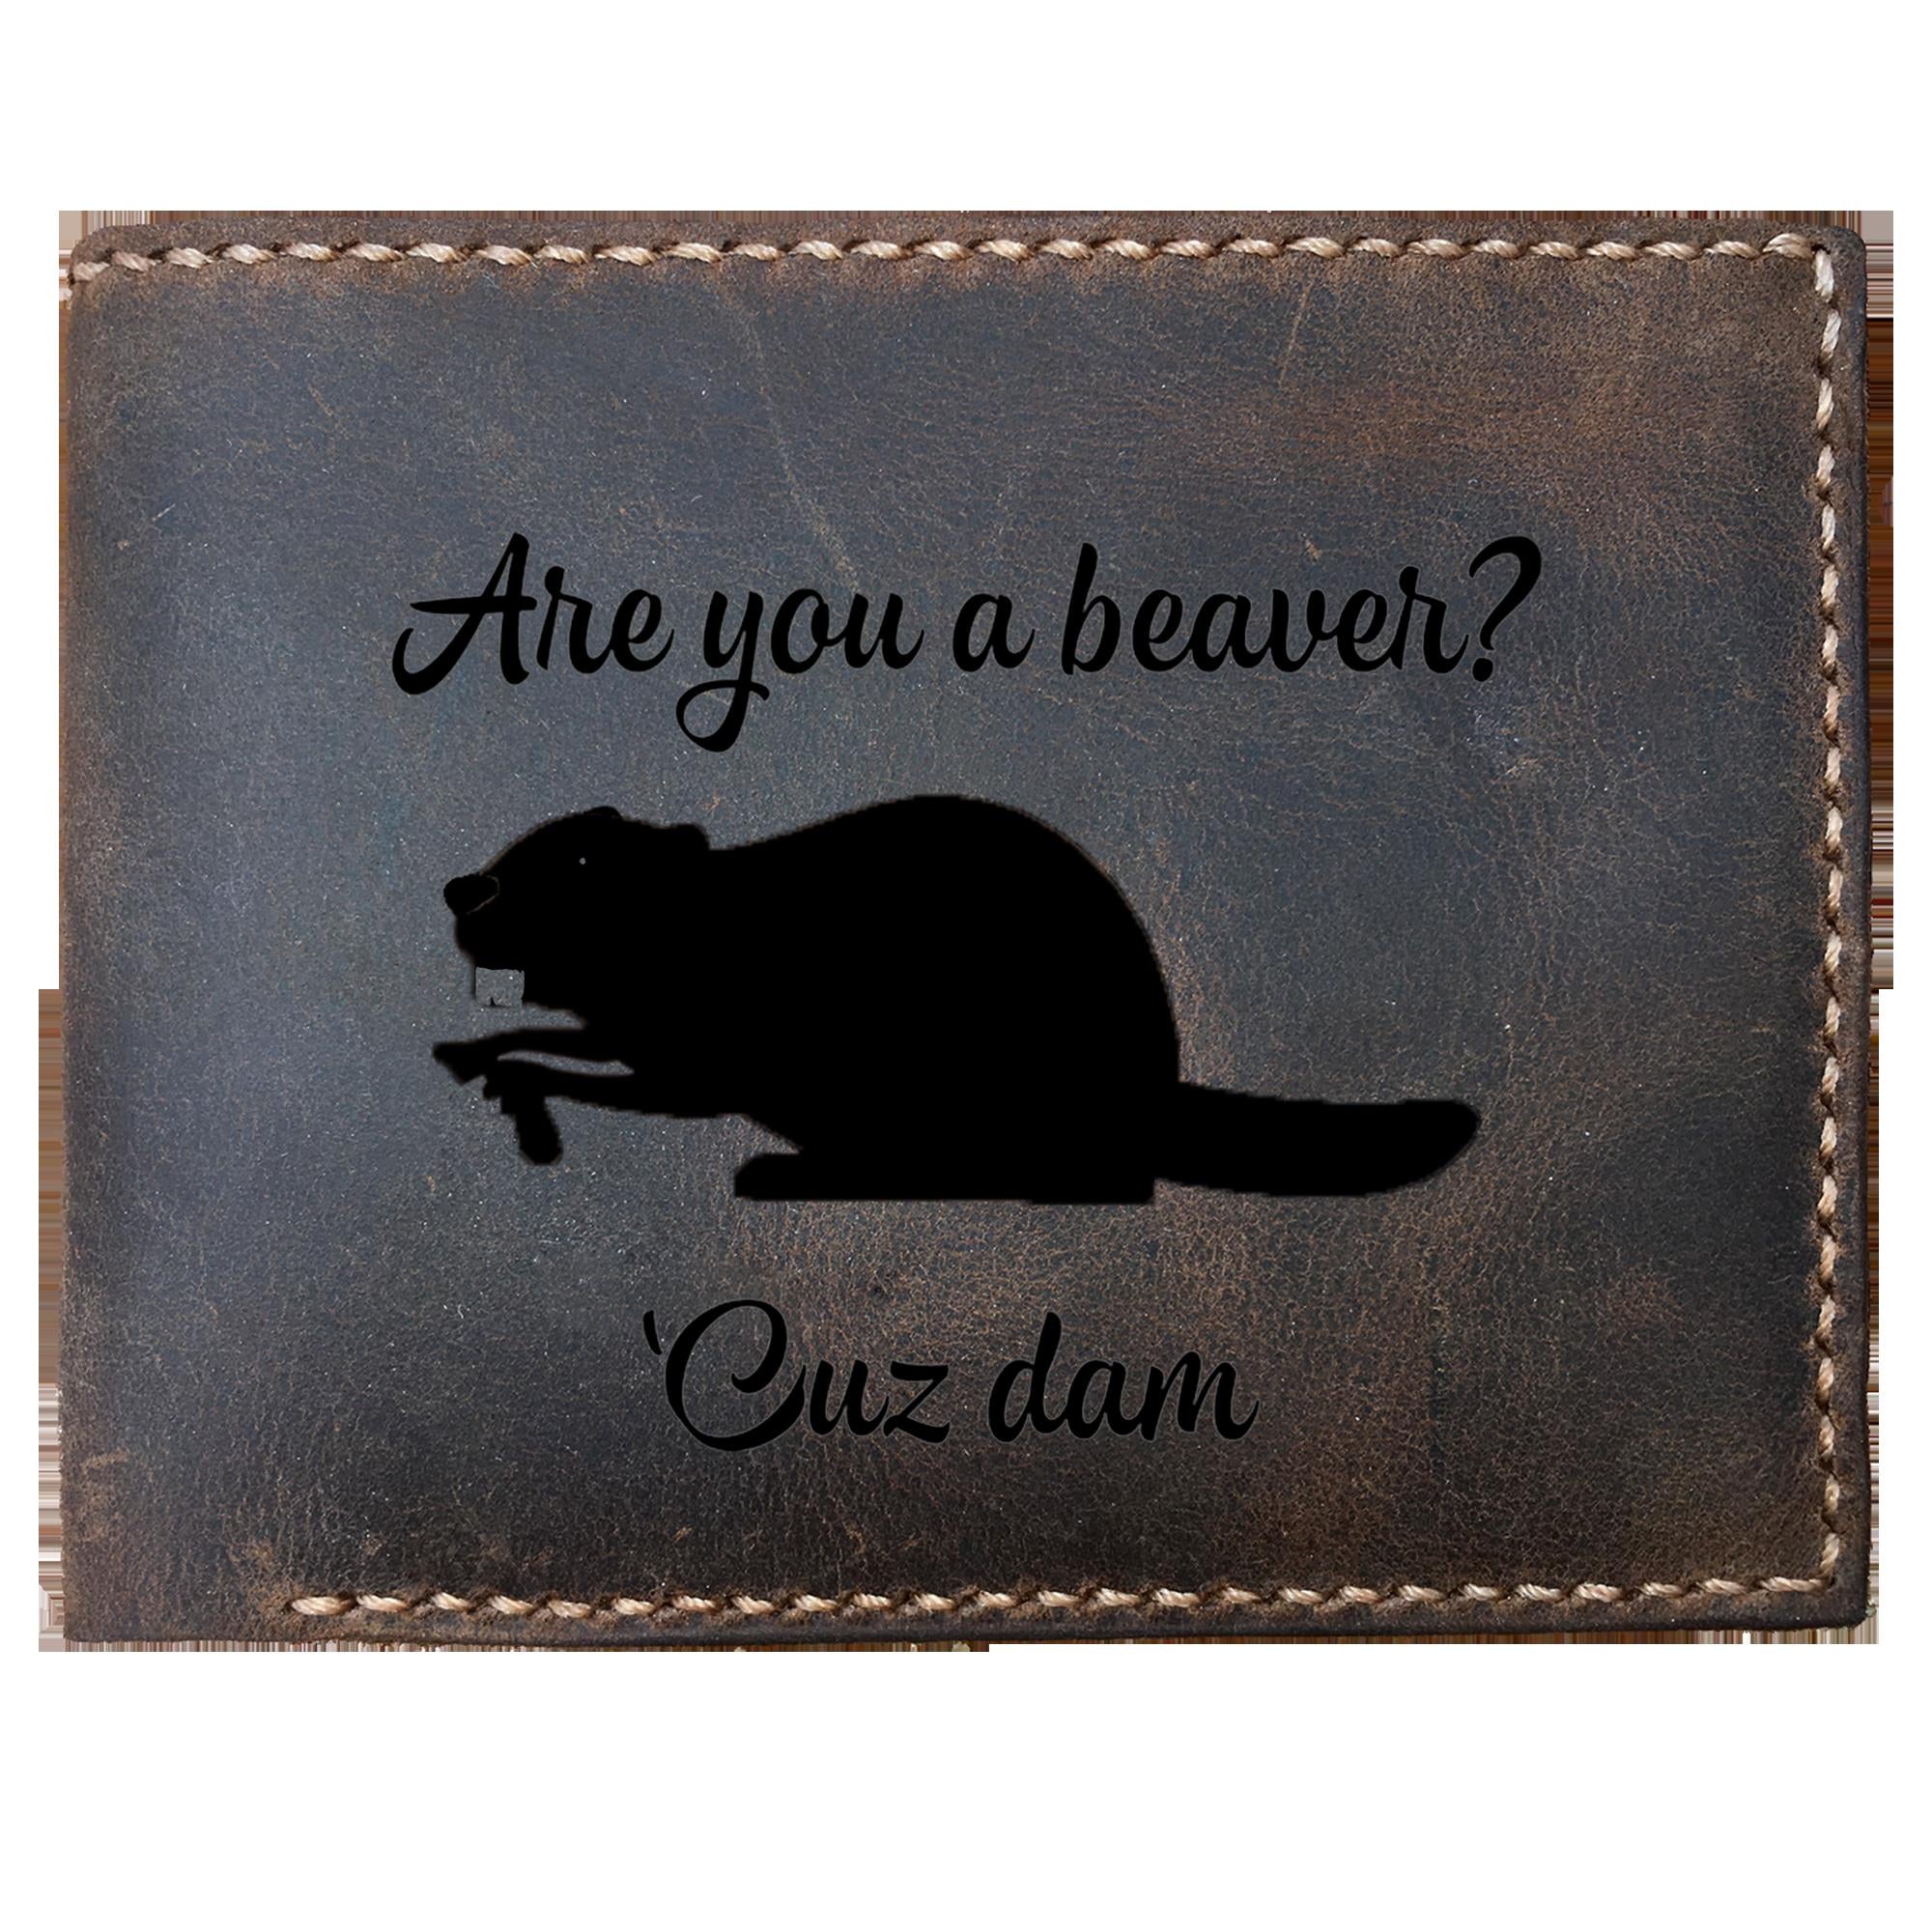 Skitongifts Funny Custom Laser Engraved Bifold Leather Wallet For Men, Are You A Beaver Cuz Dam The Busy Beaver